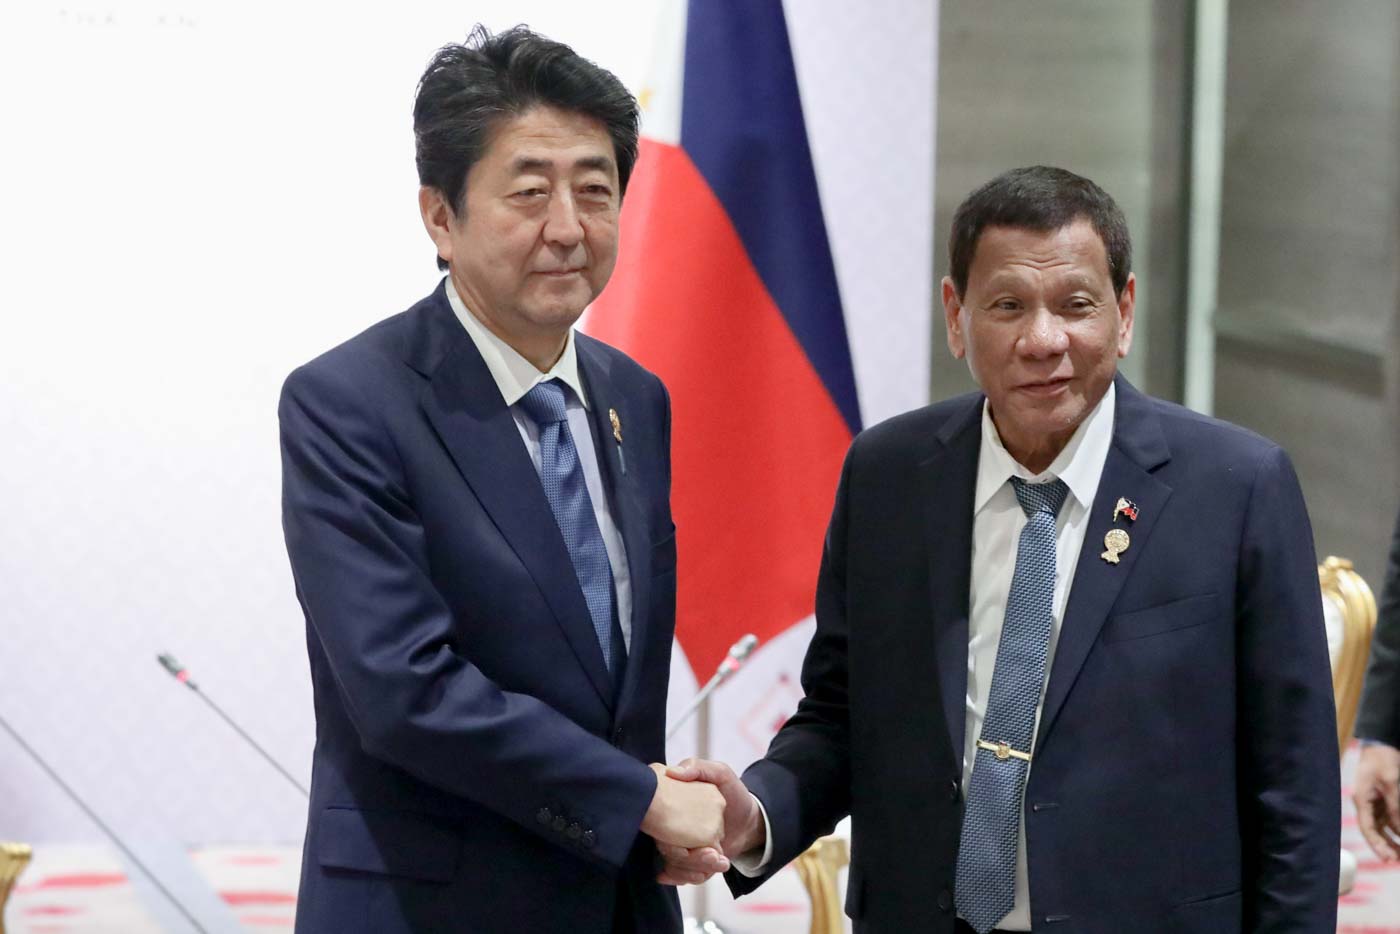 ALLIES. Philippine President Rodrigo Duterte and Japanese Prime Minister Shinzo Abe shake hands during their bilateral meeting on the sidelines of the ASEAN Summit in Nonthaburi, Thailand, on November 4, 2019. Malacañang photo 